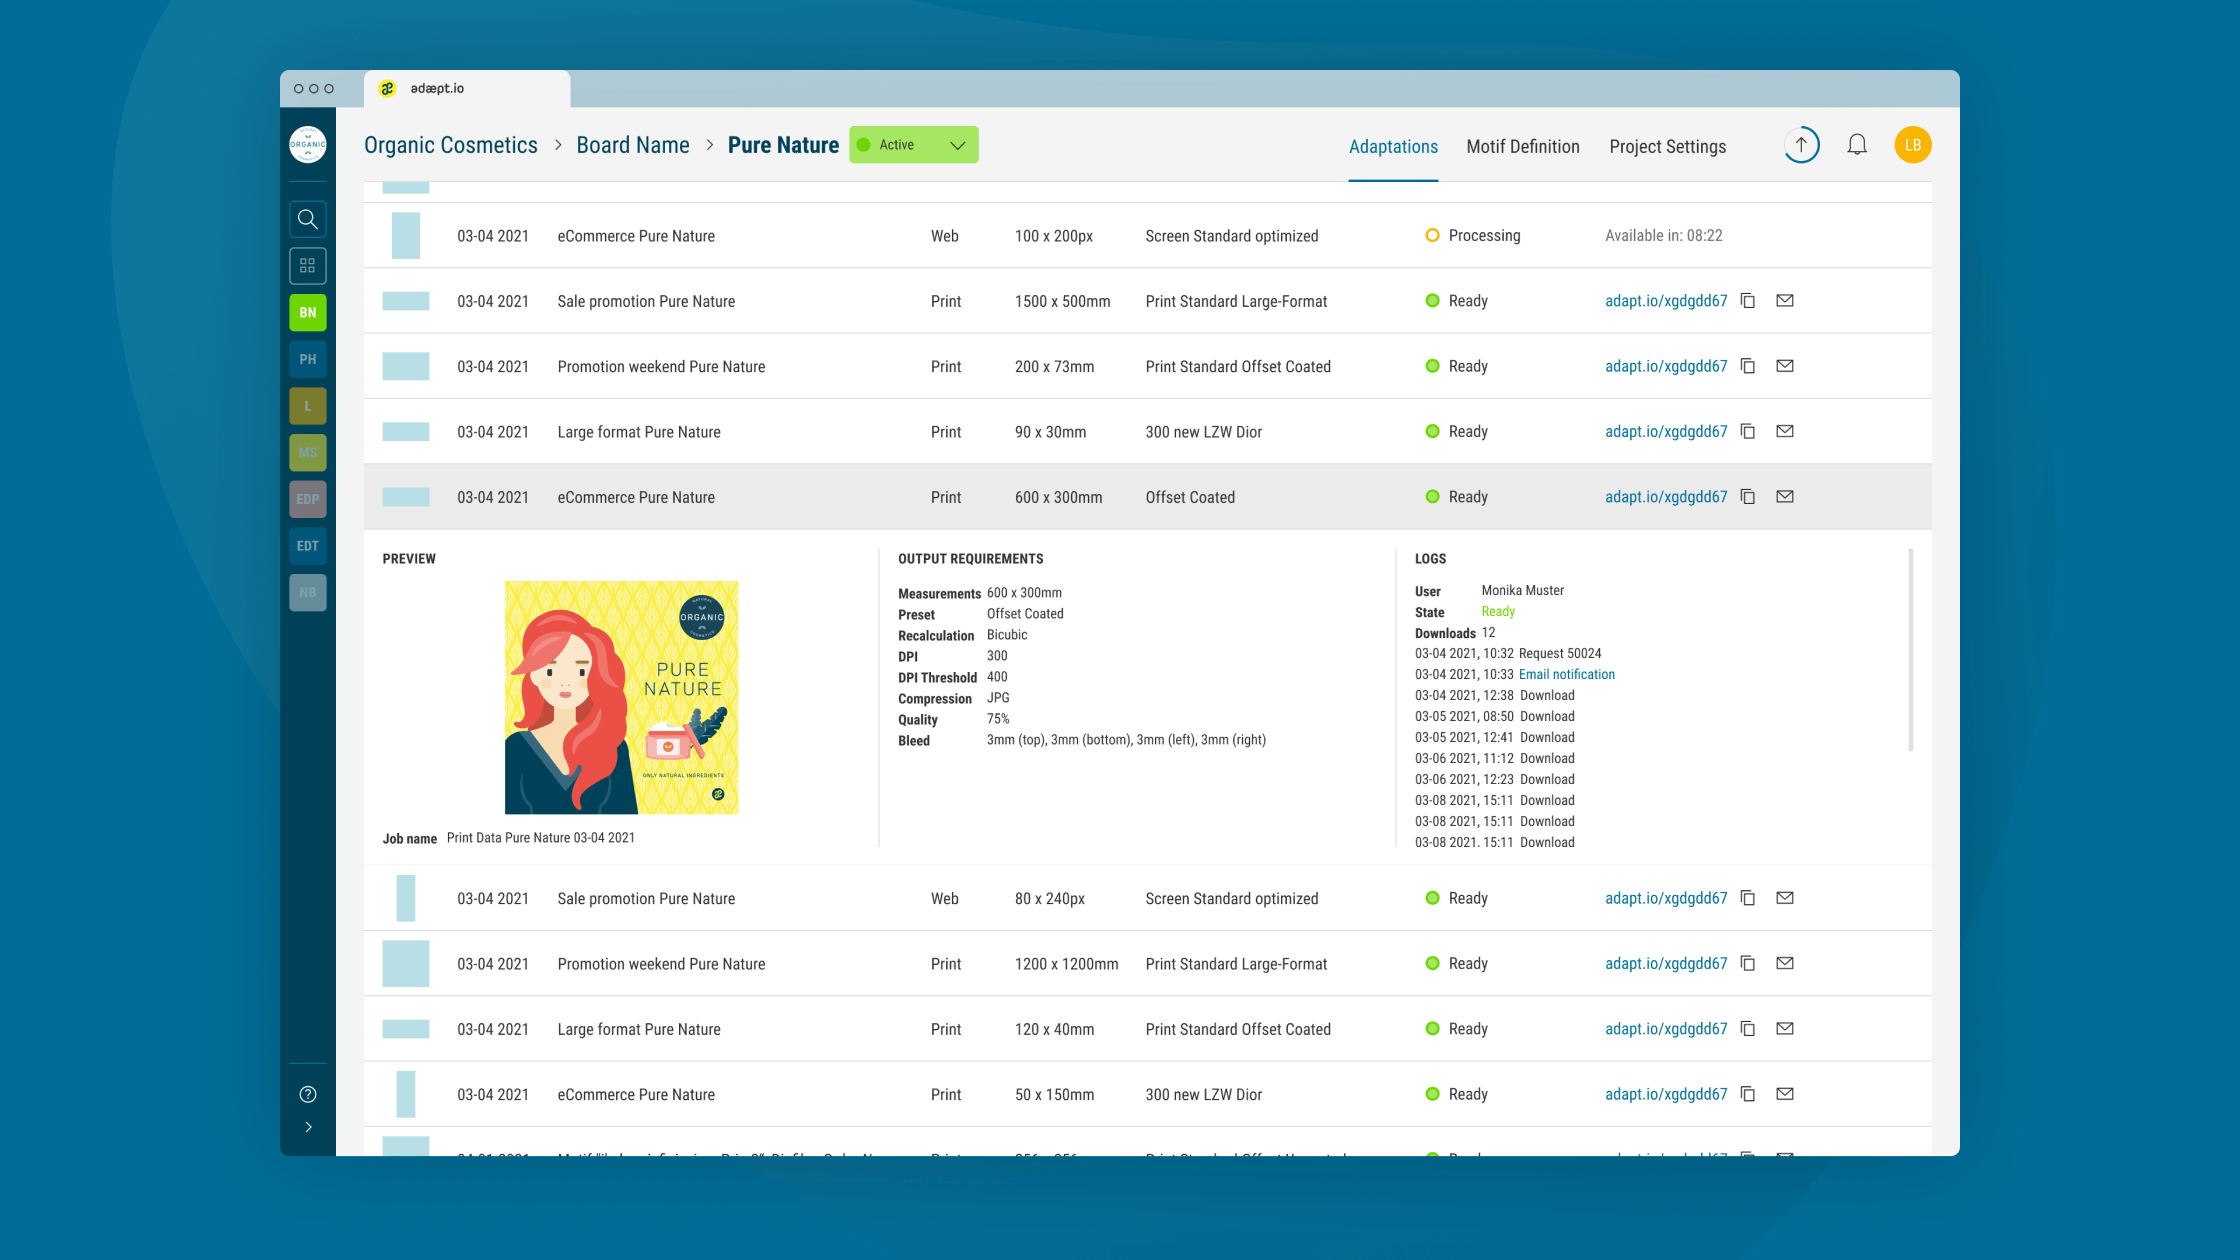 Screenshot of the adaept.io user interface on blue background